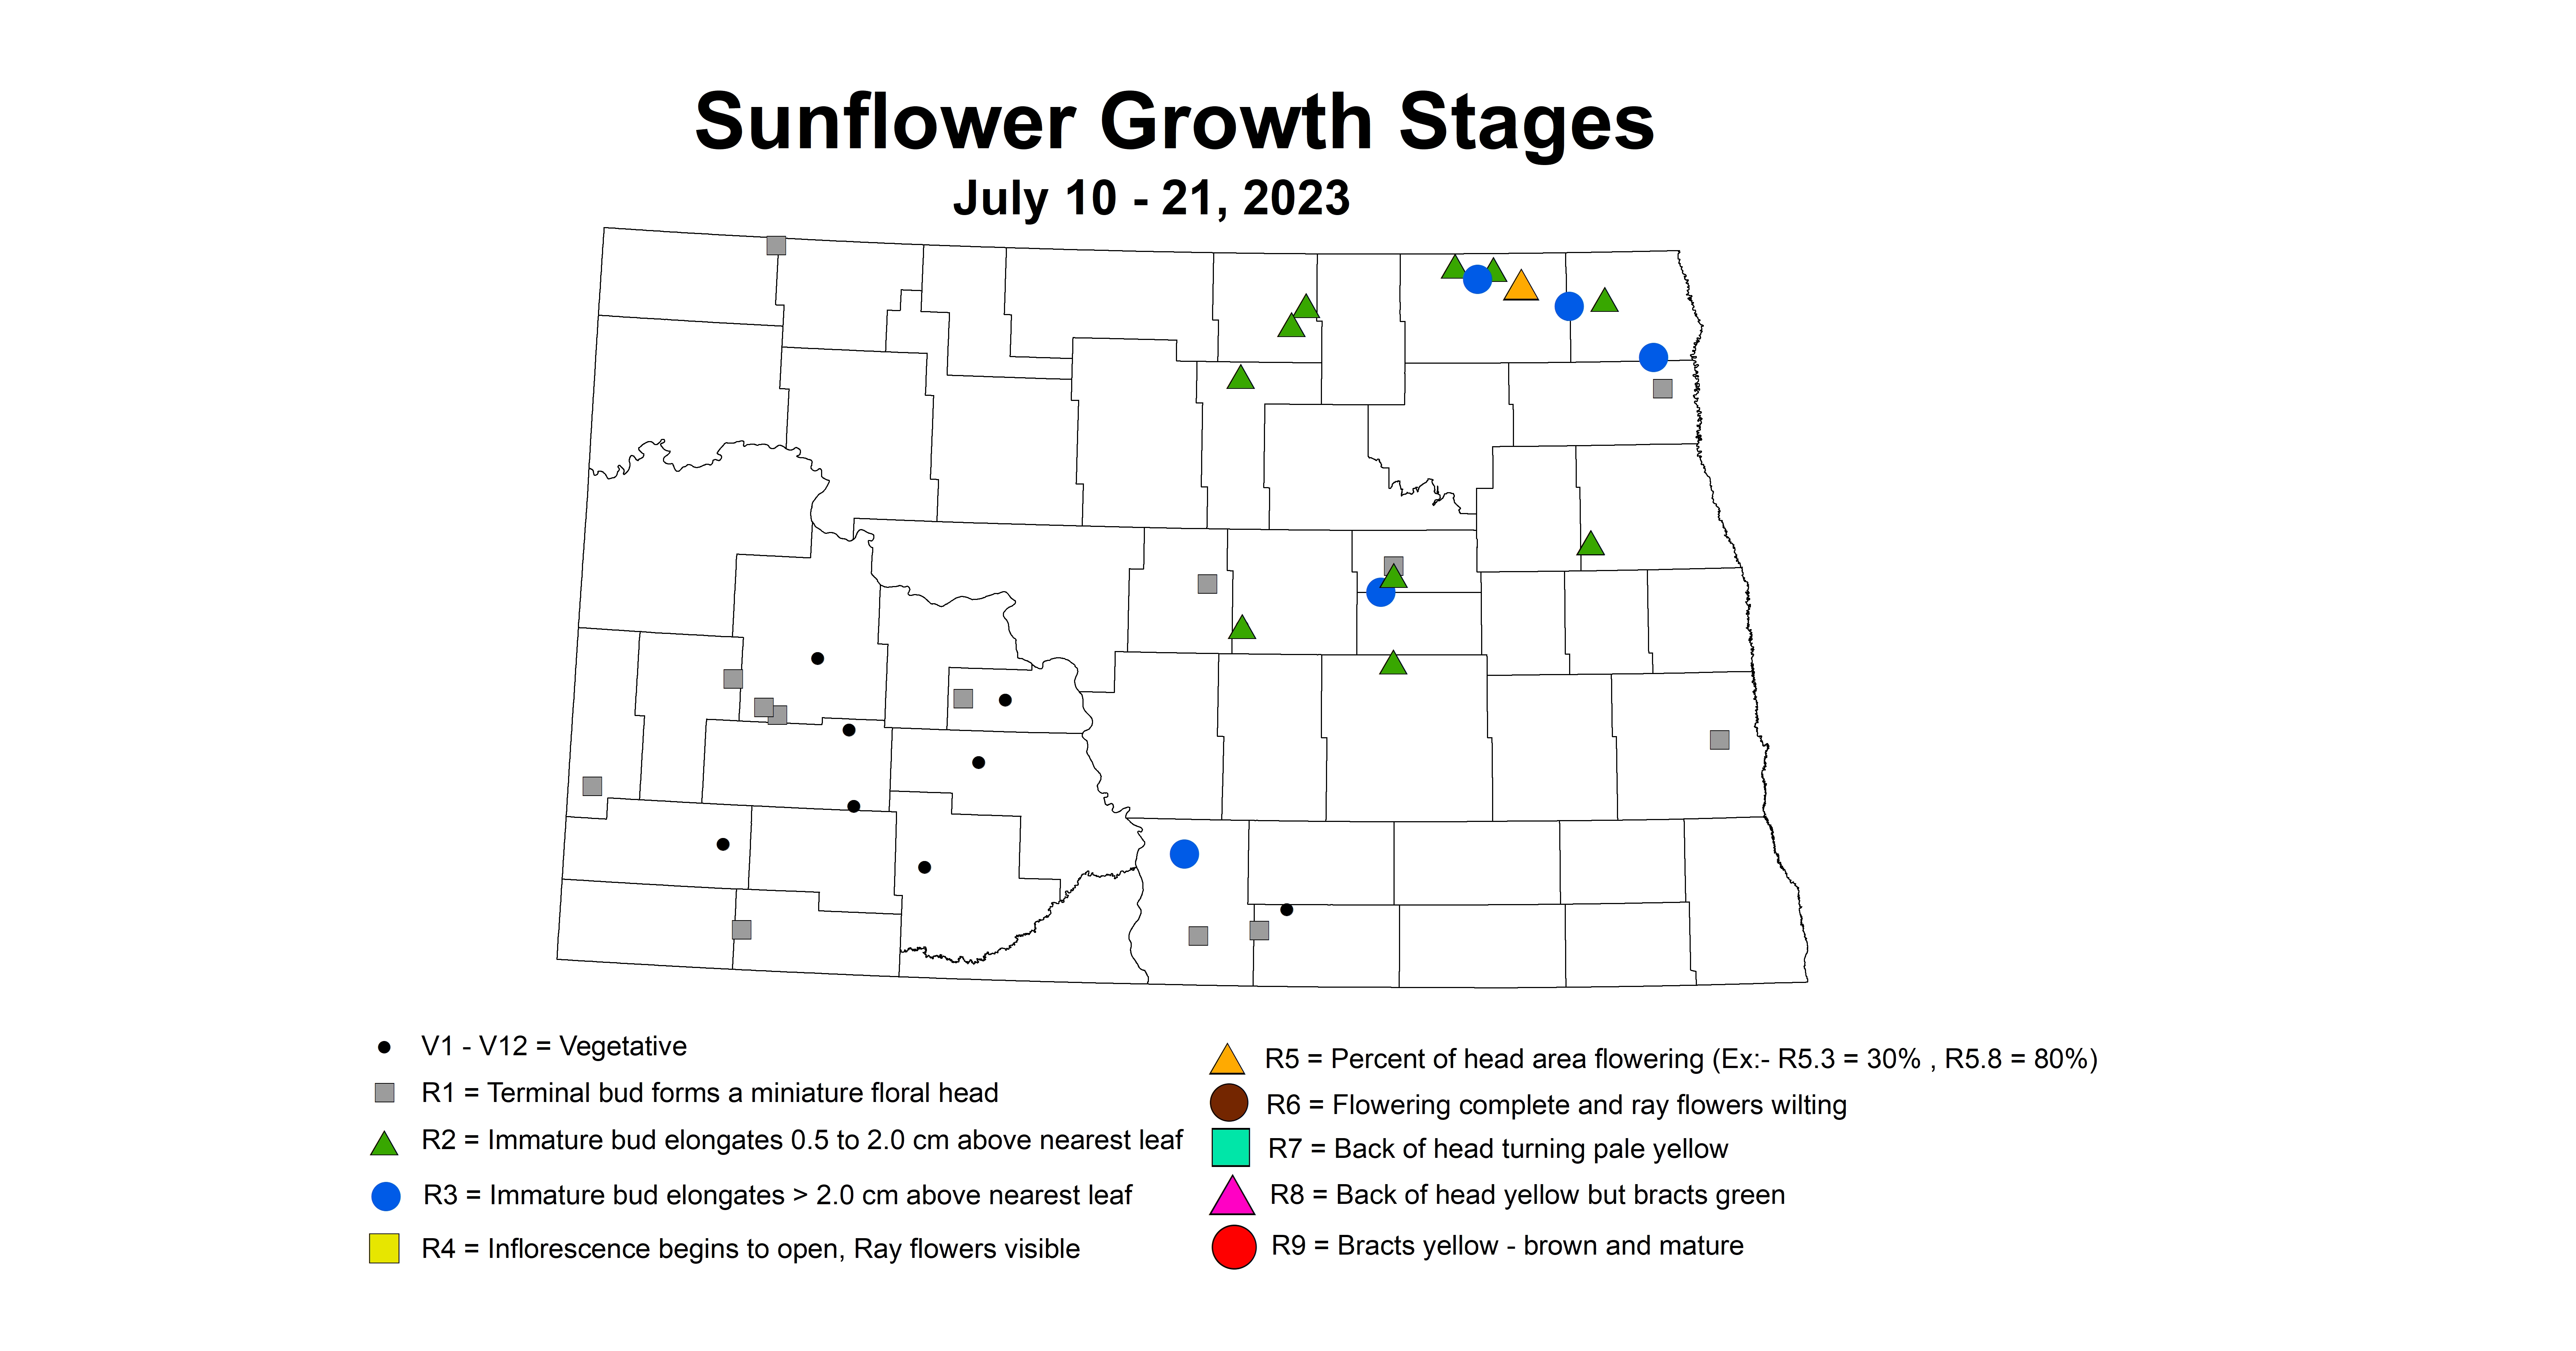 sunflower growth stages July 10-21 2023